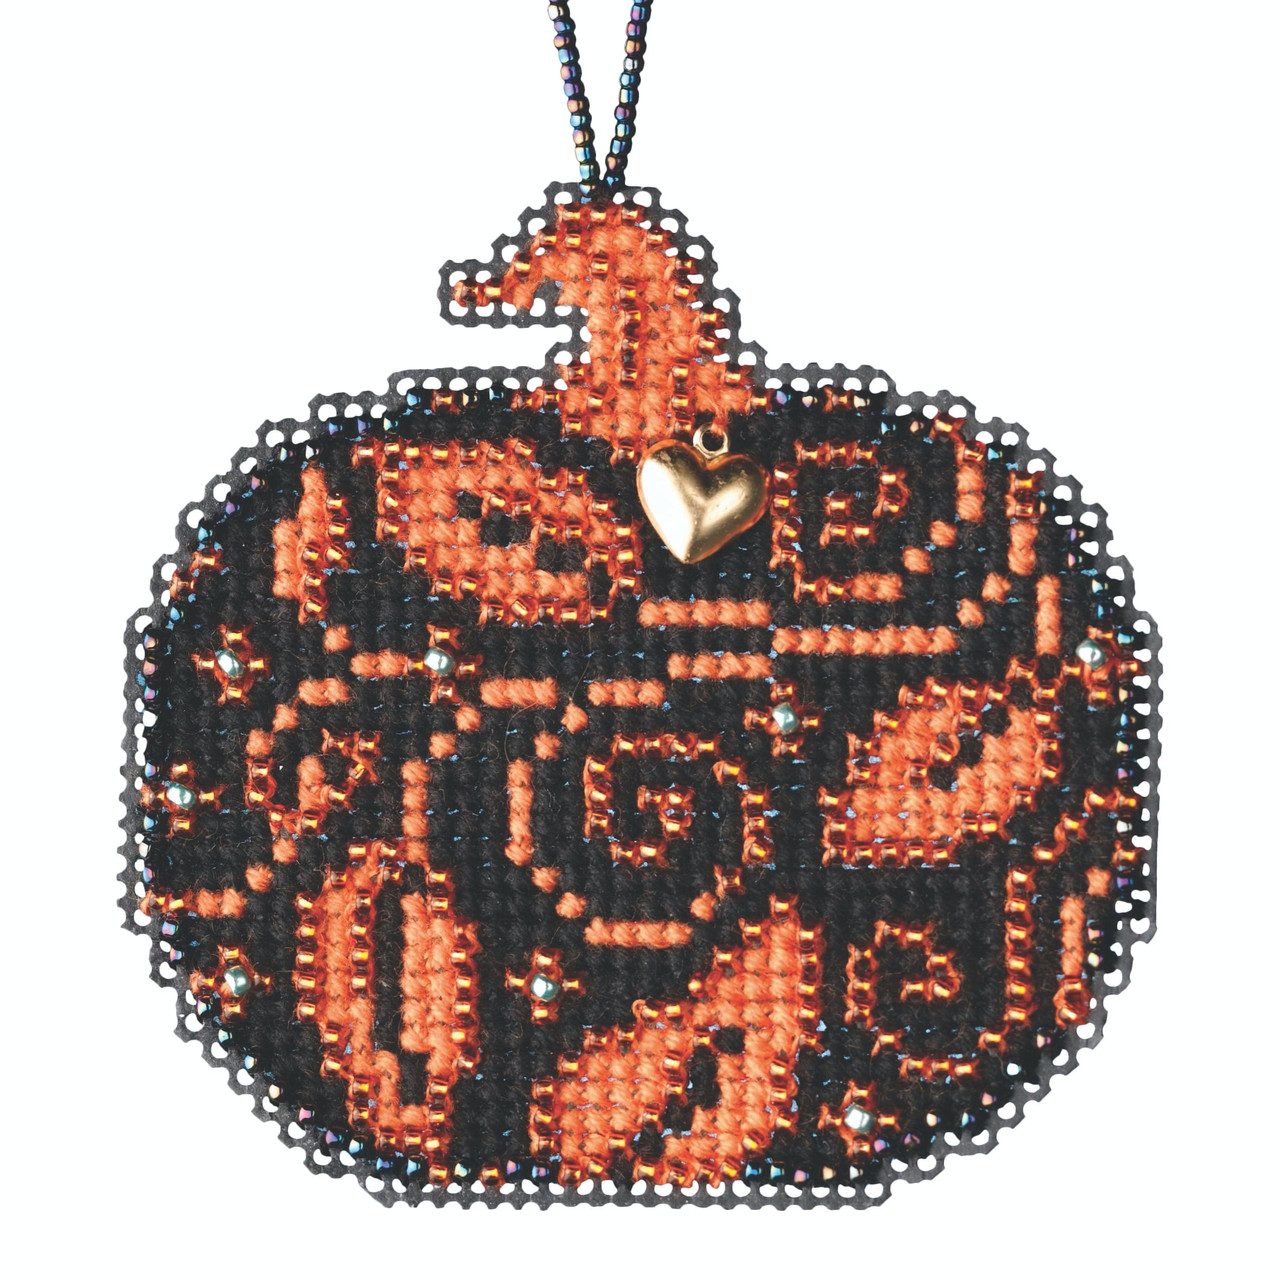 Glowing Pumpkin Beaded Counted Cross Stitch Kit Mill Hill 2020 Ornament MH162023